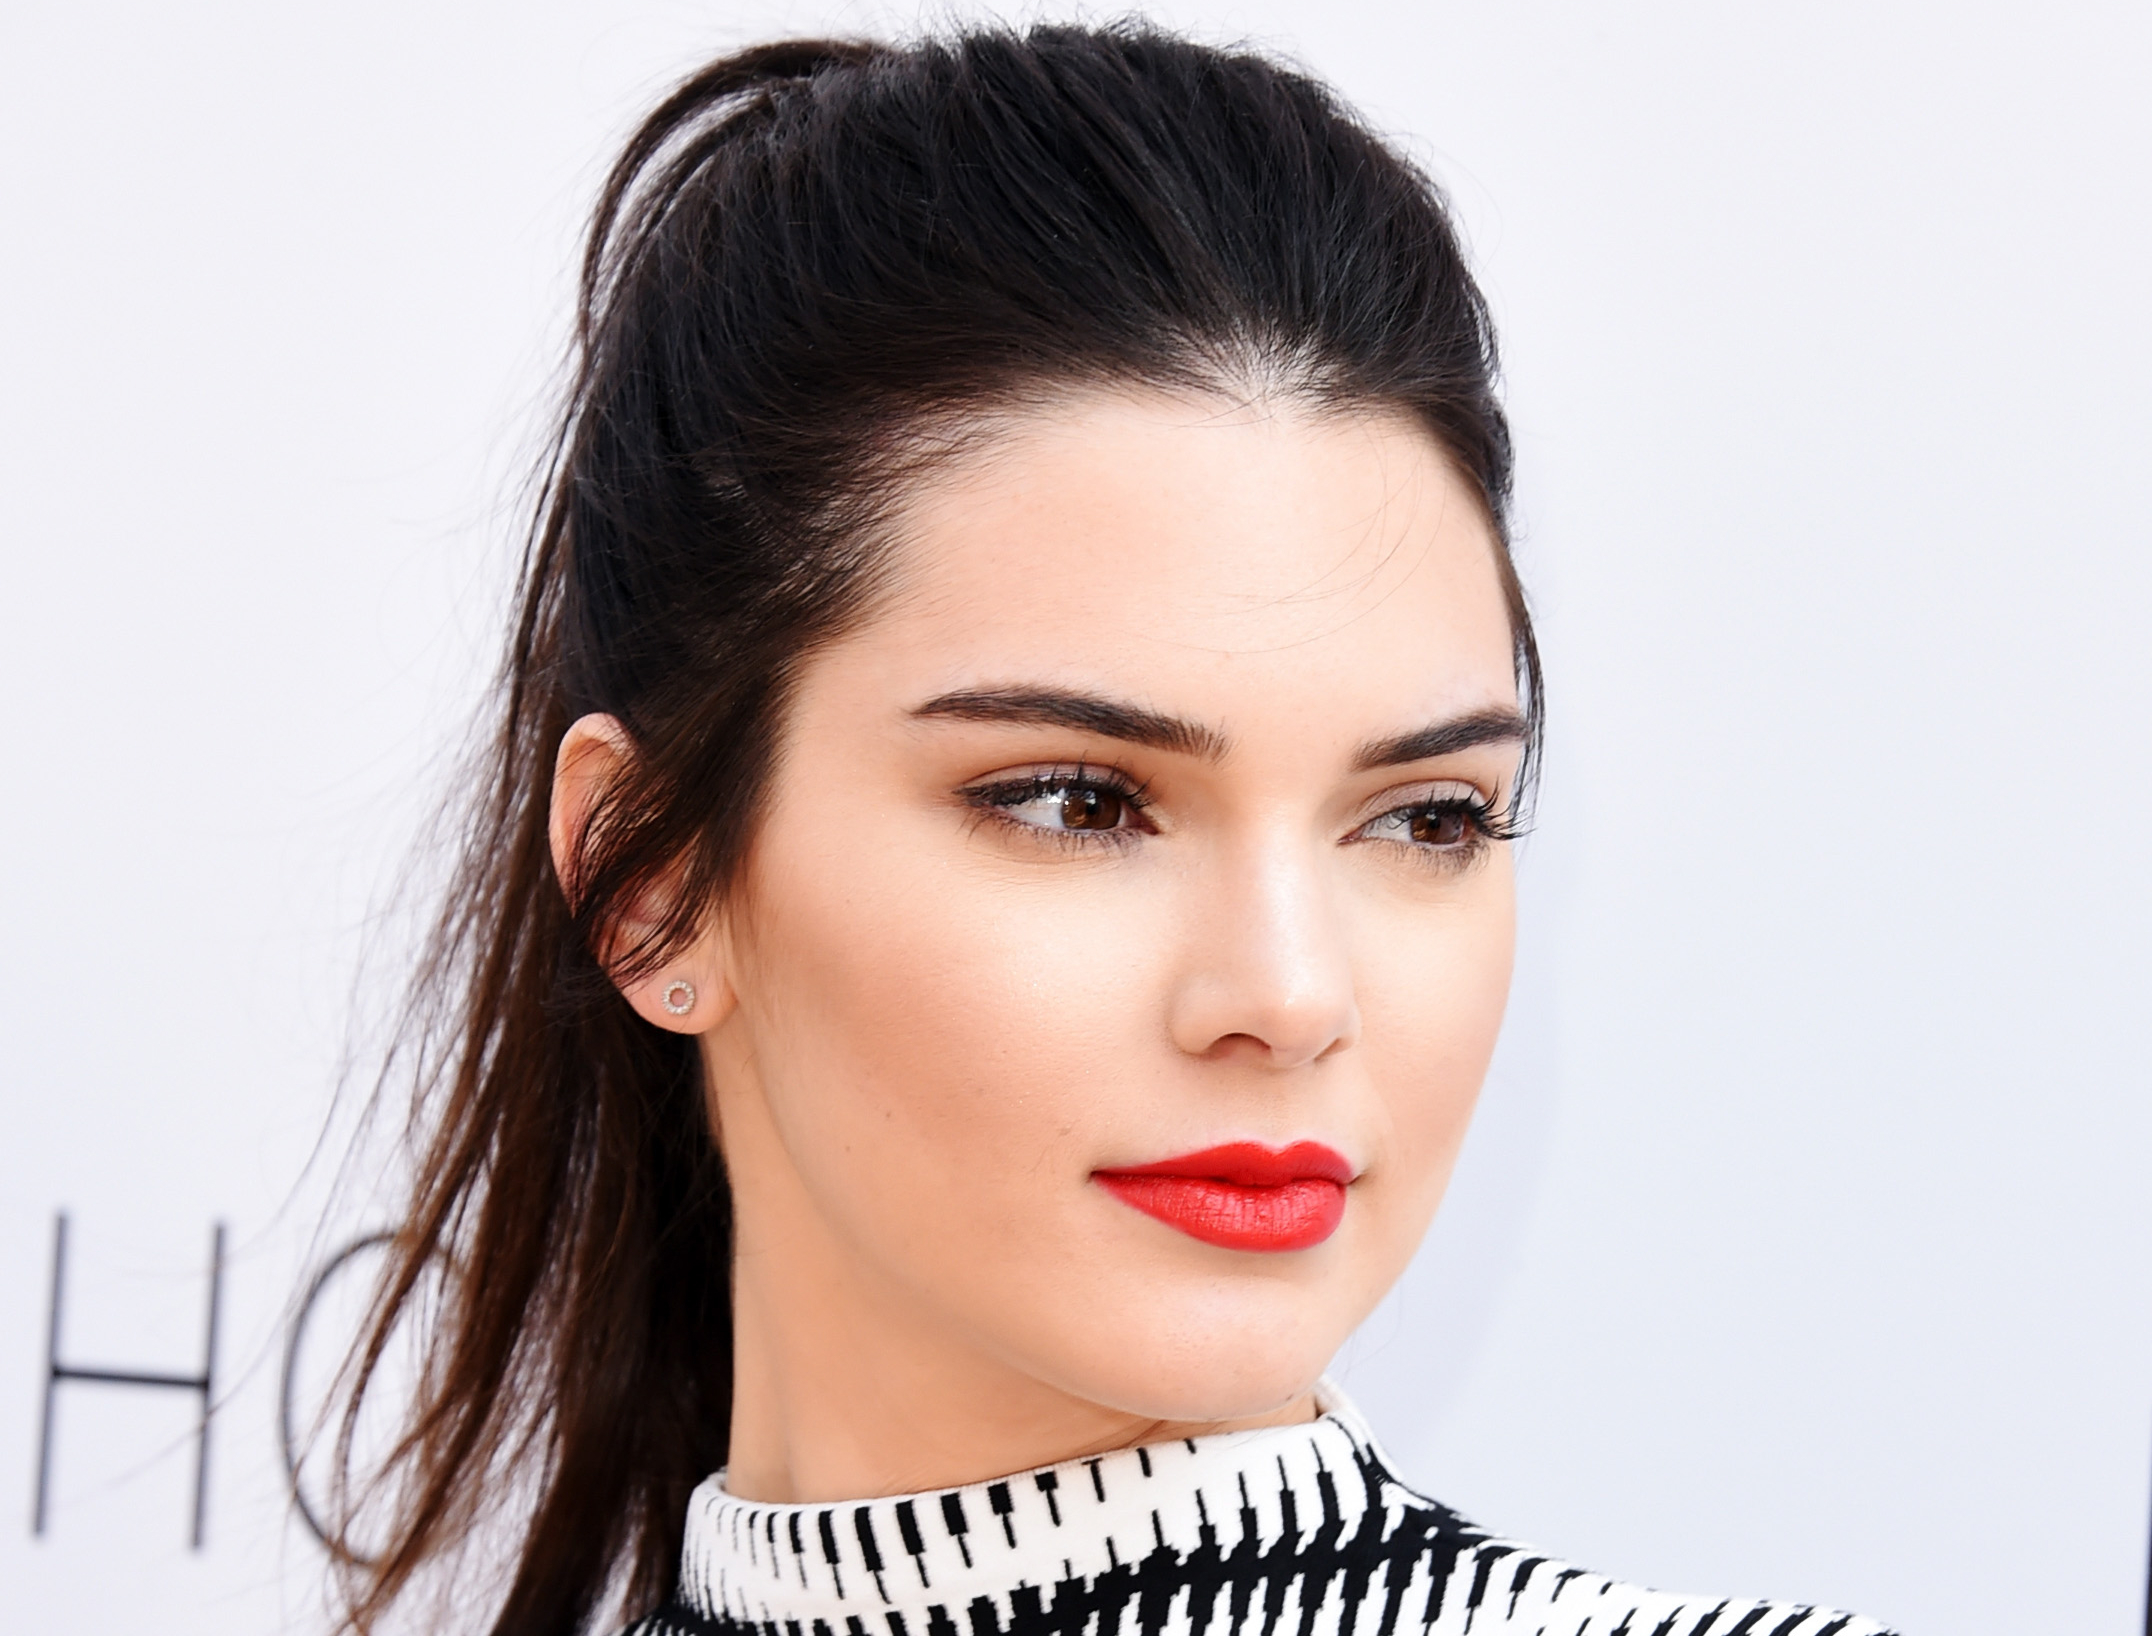 Kendall Jenner 2, HD Celebrities, 4k Wallpapers, Images, Backgrounds ...